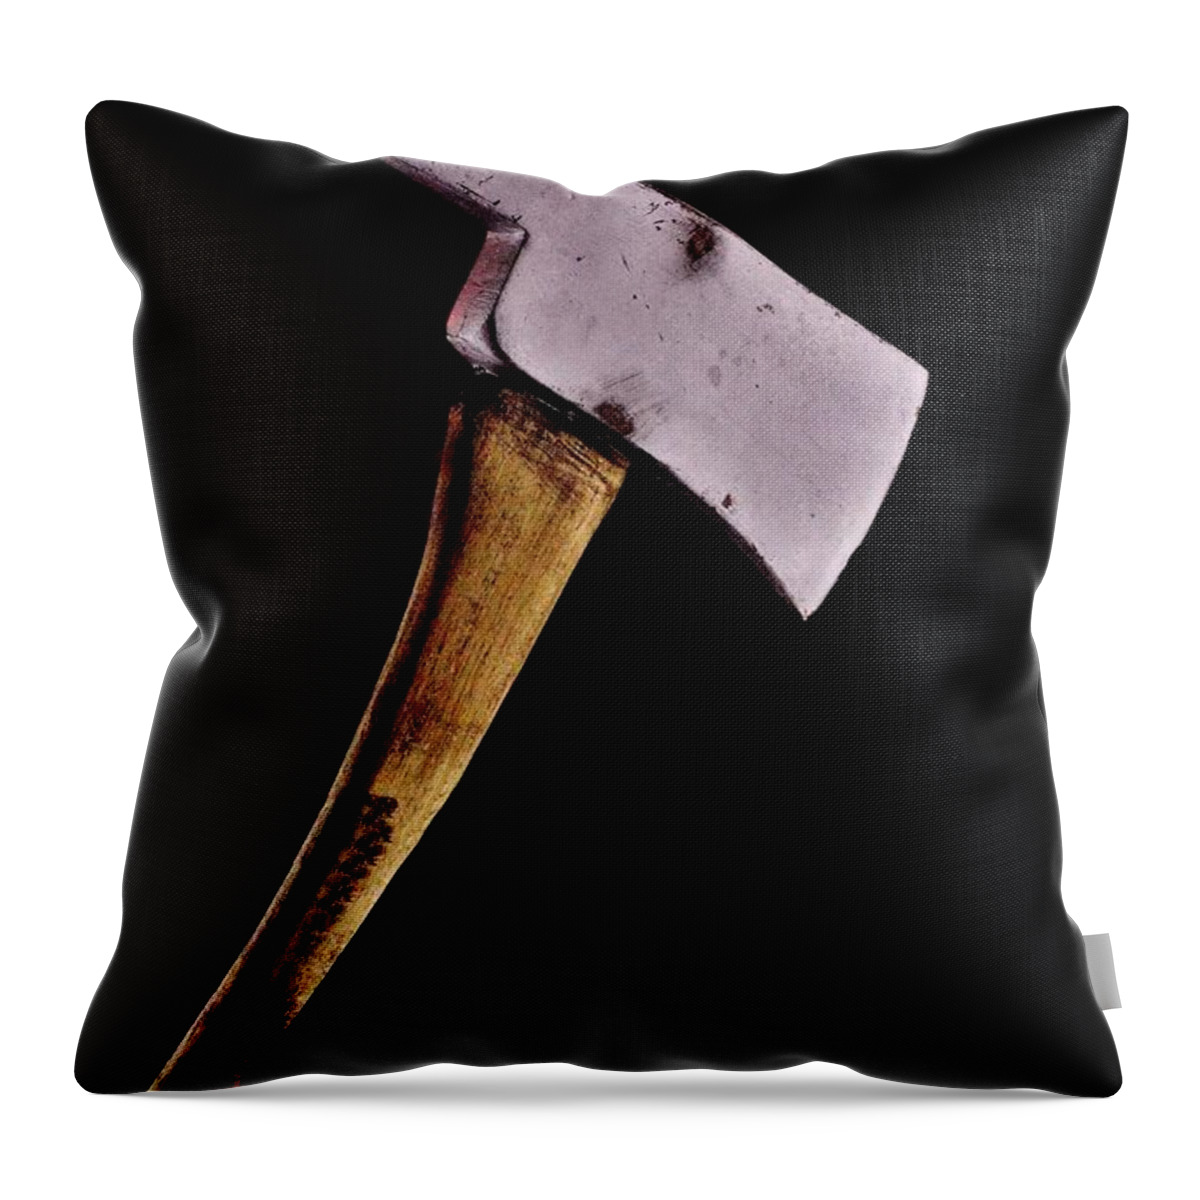 The Shining Throw Pillow featuring the photograph Here's Johnny by Benjamin Yeager